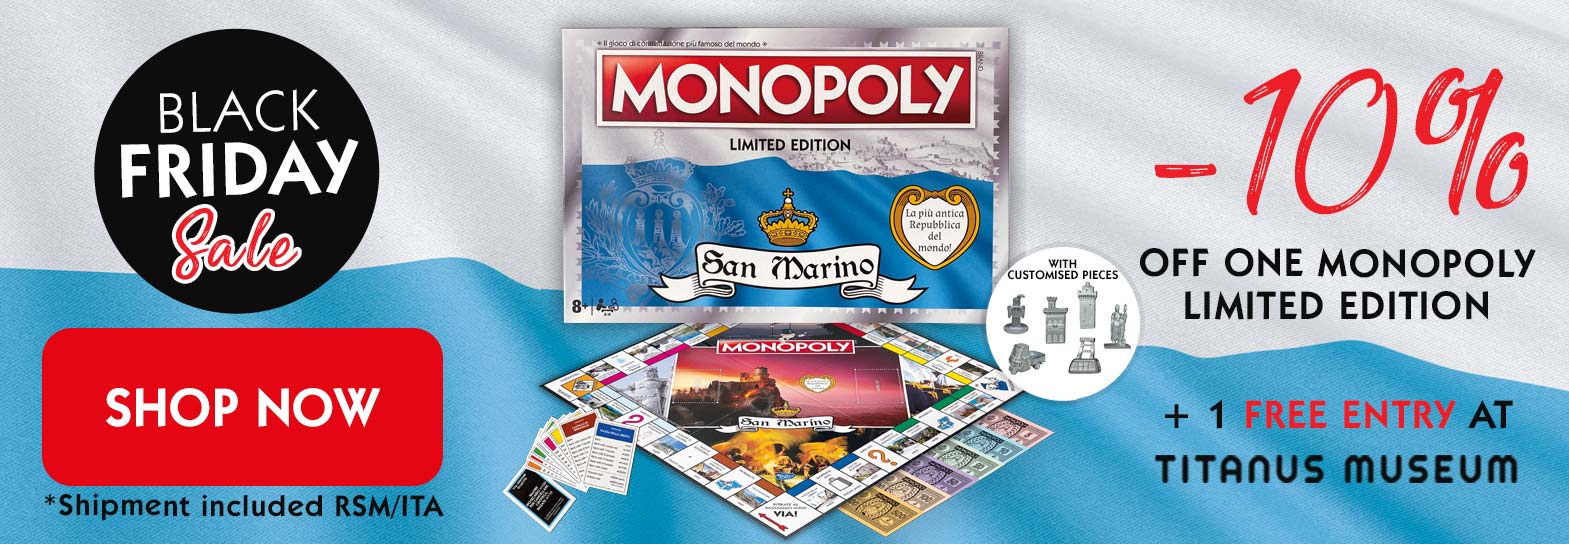 monopoly-banner-sito-black-friday-eng-1